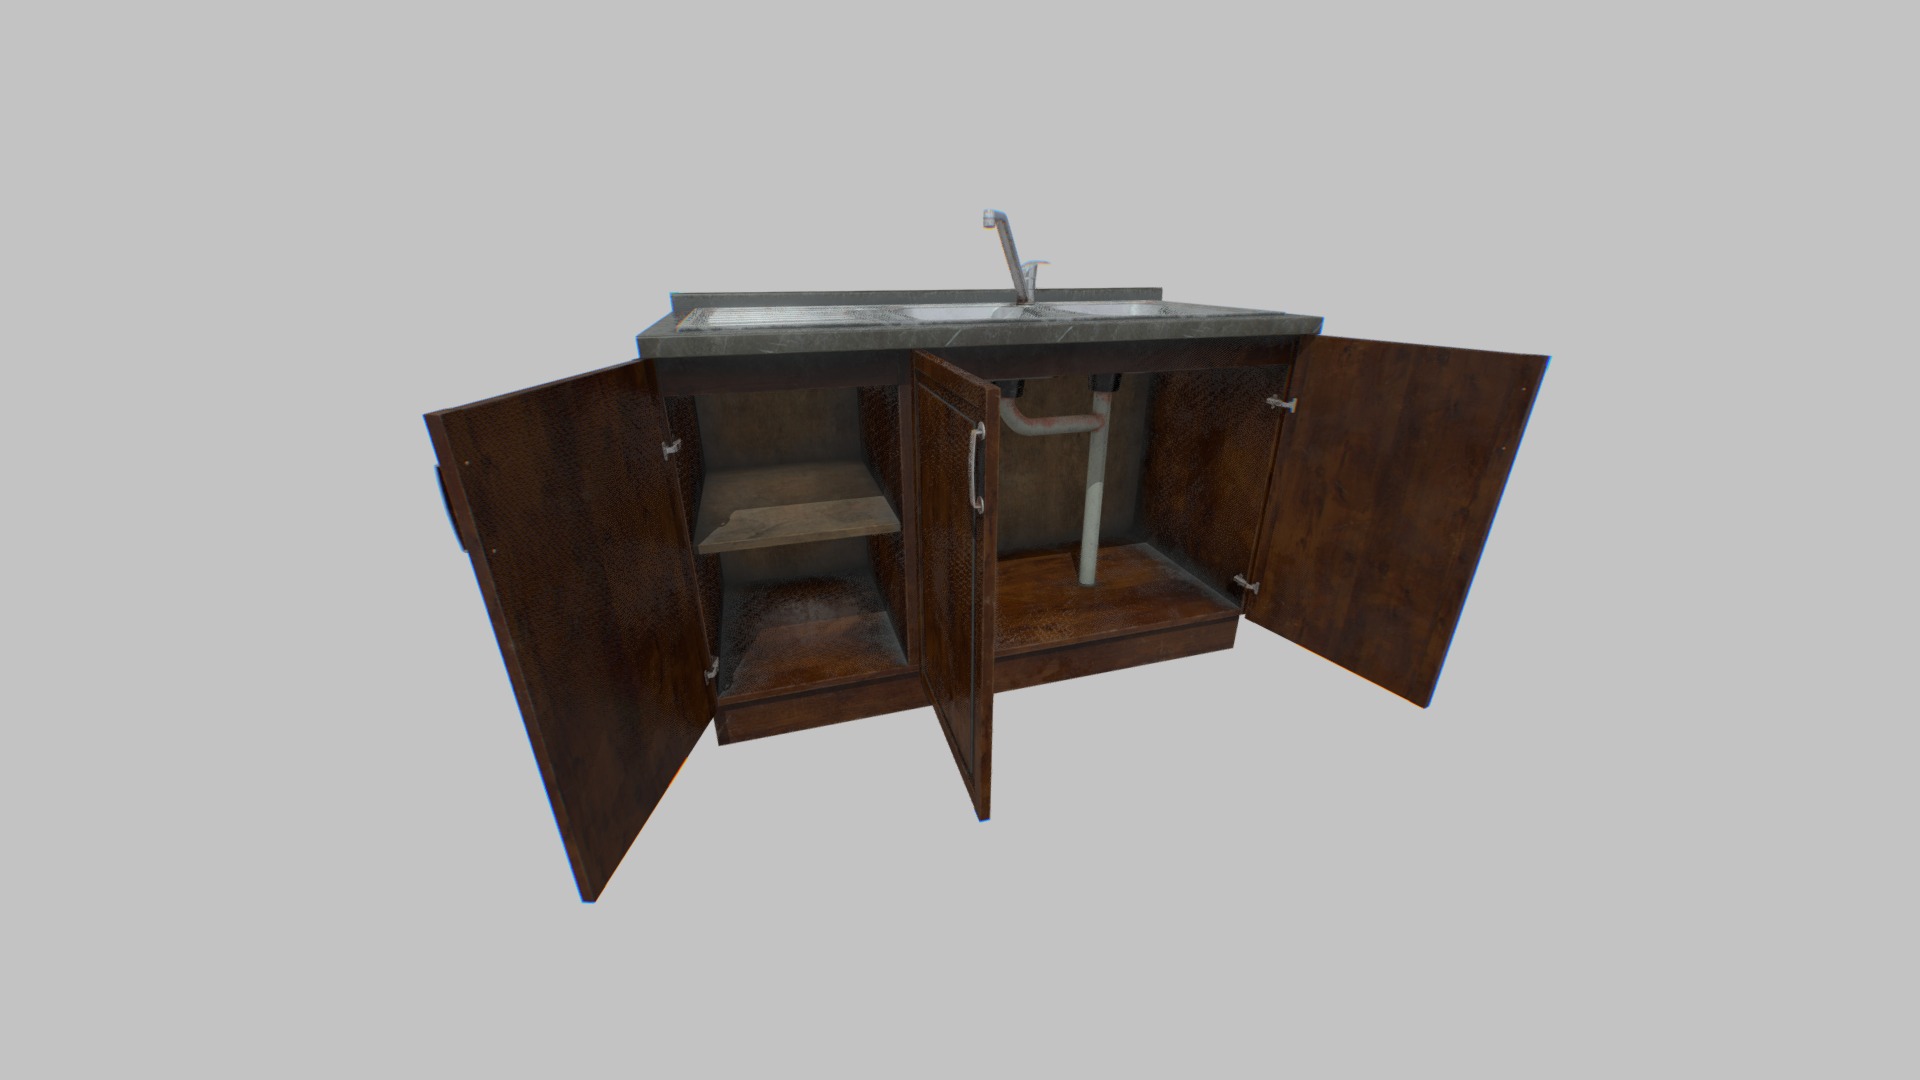 3D model Old Kitchen Cabinet with Sink - This is a 3D model of the Old Kitchen Cabinet with Sink. The 3D model is about a wooden table with a chair.